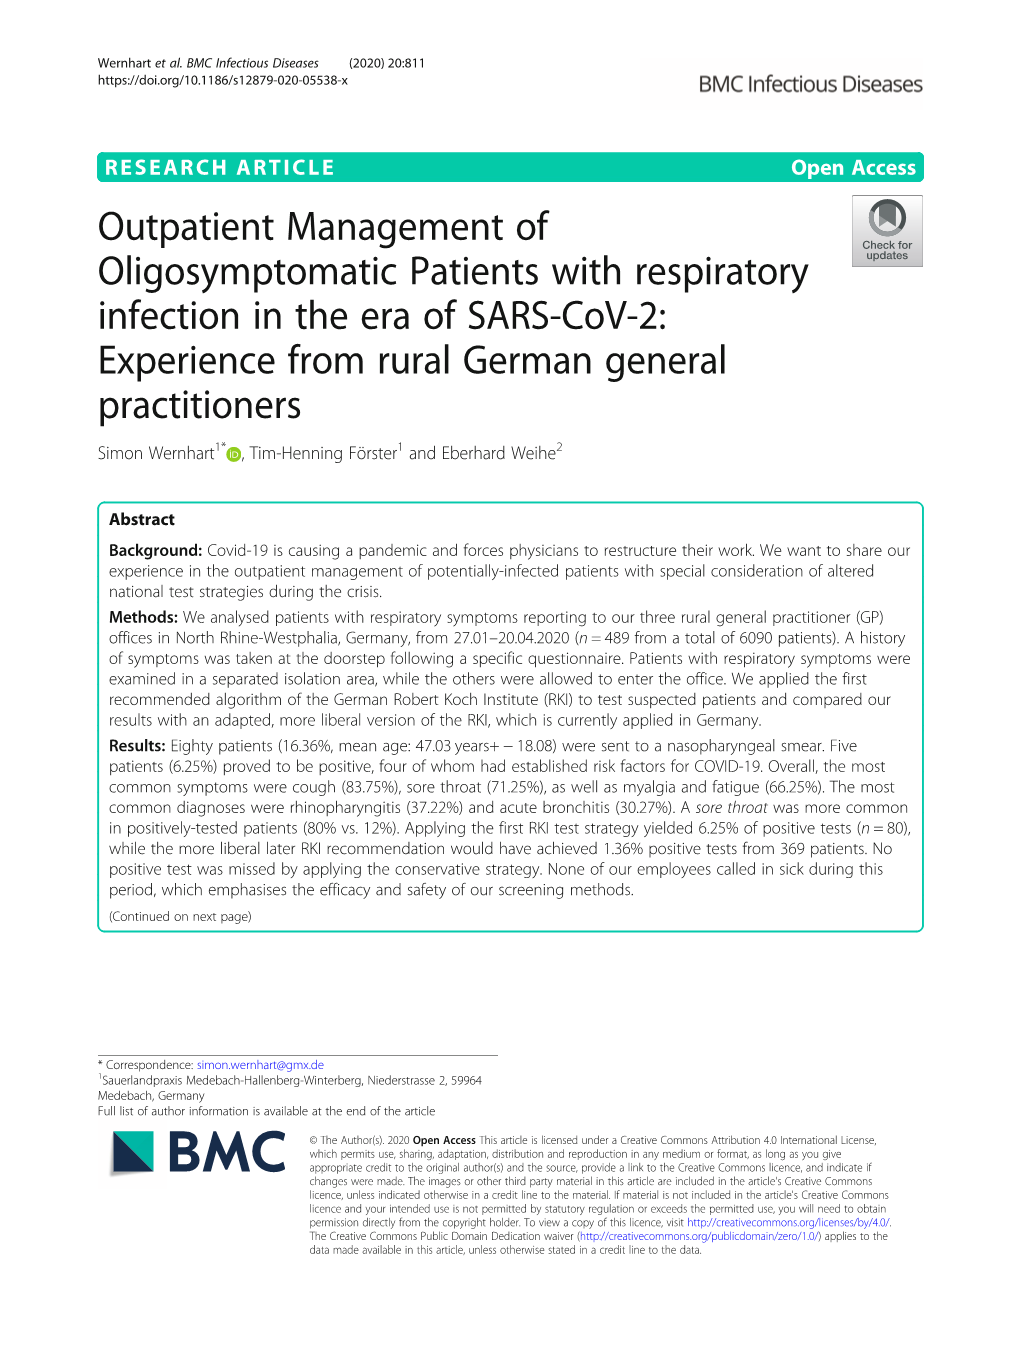 Experience from Rural German General Practitioners Simon Wernhart1* , Tim-Henning Förster1 and Eberhard Weihe2